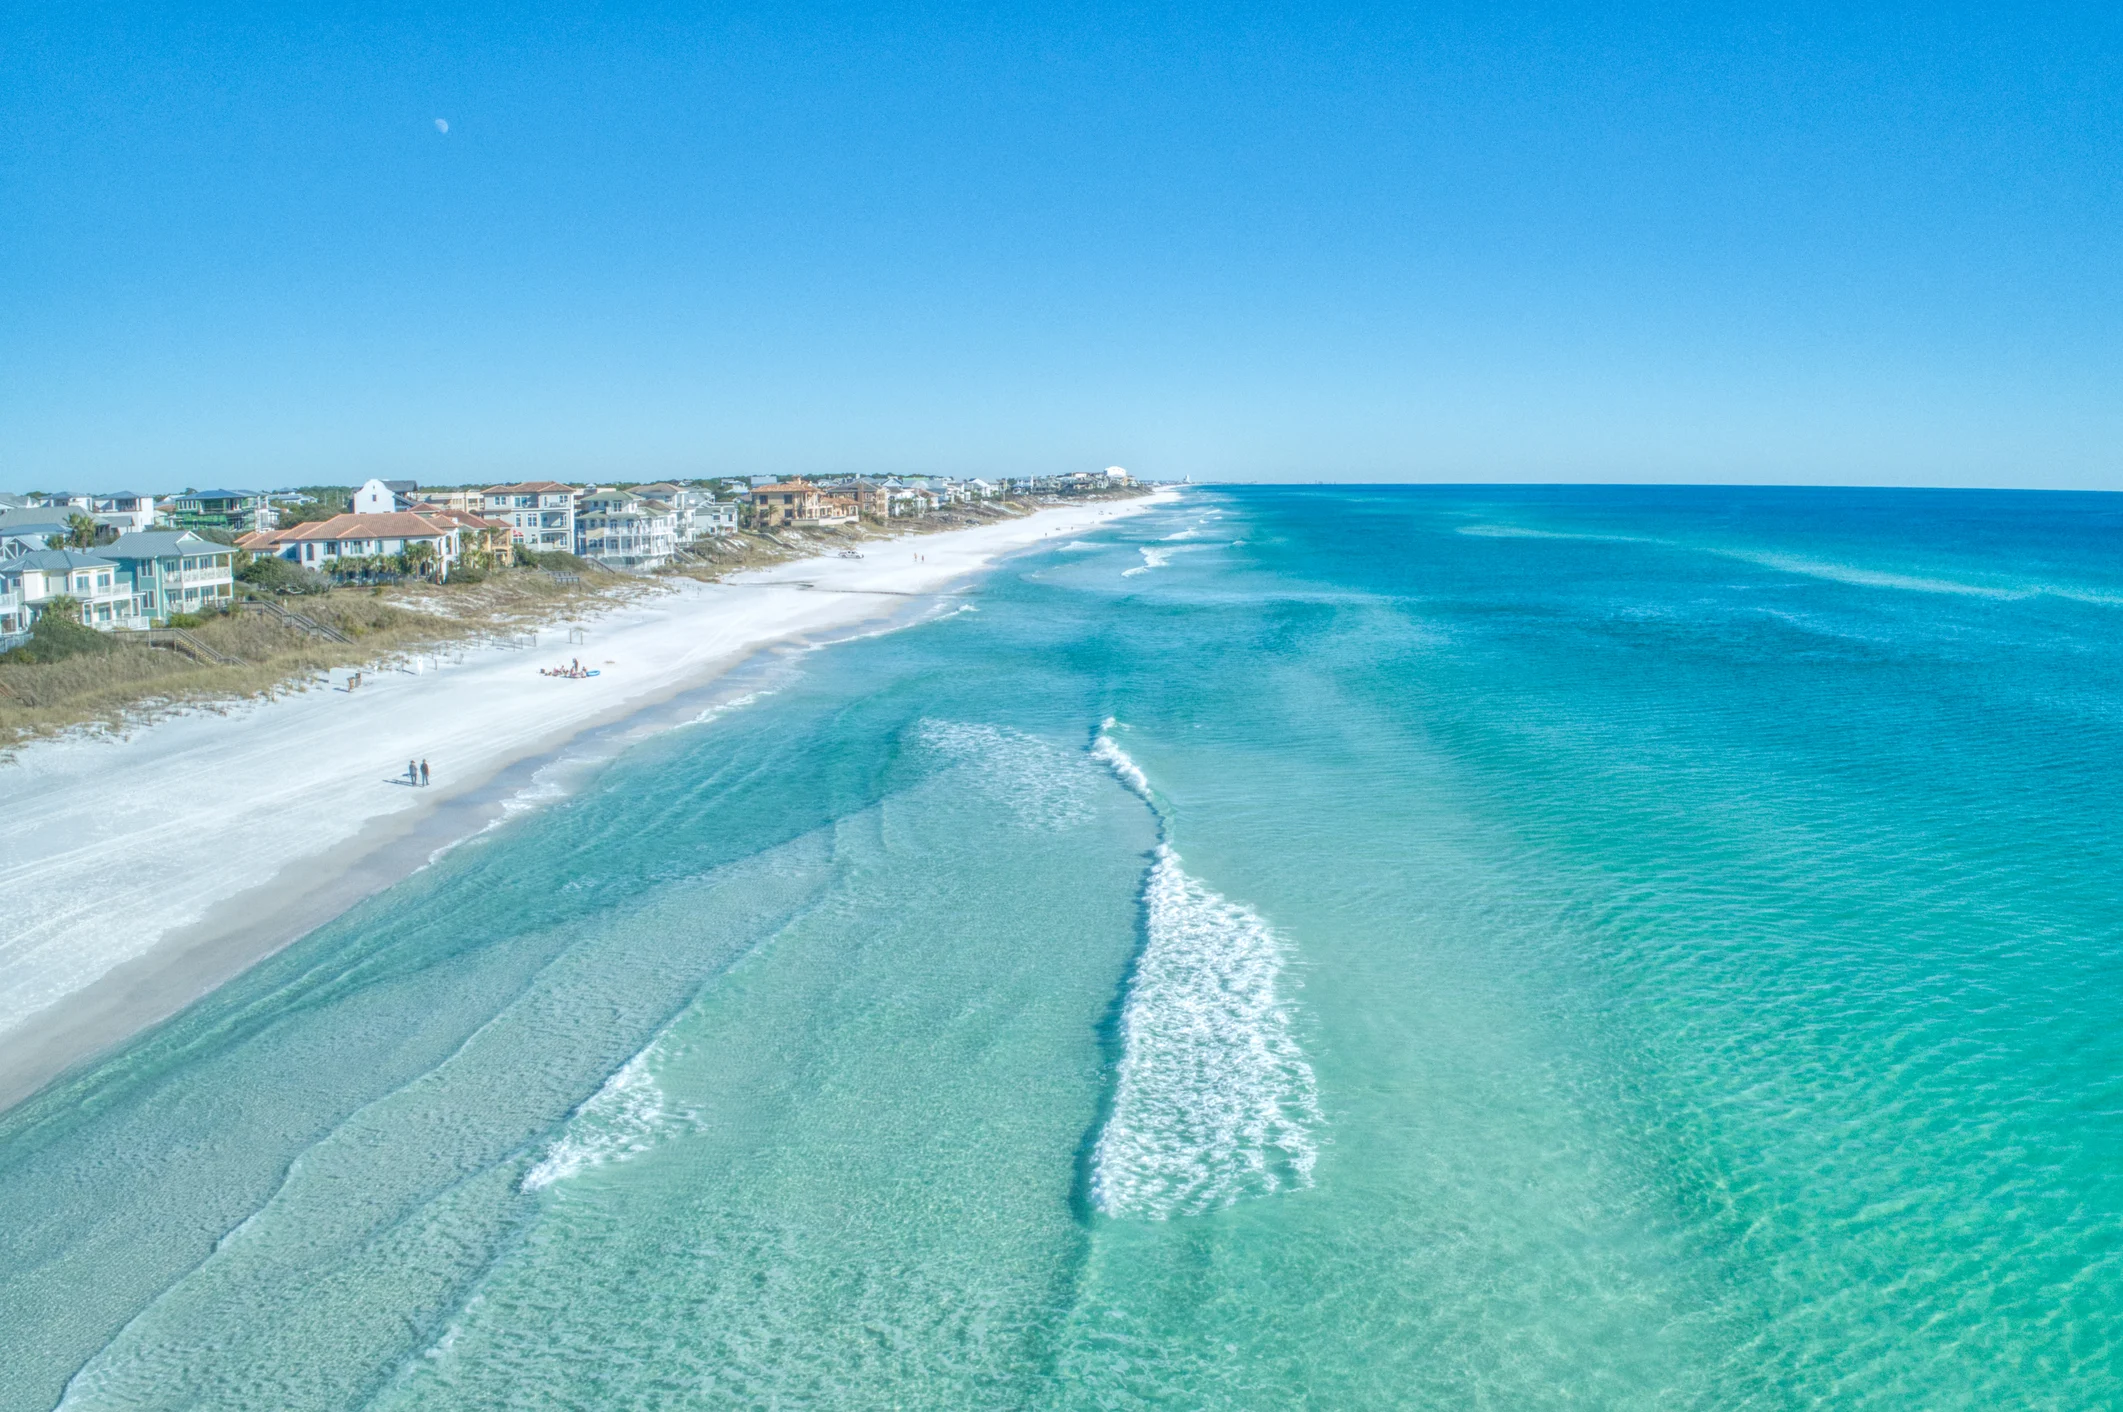 Things to Do & Attractions in Santa Rosa Beach Florida